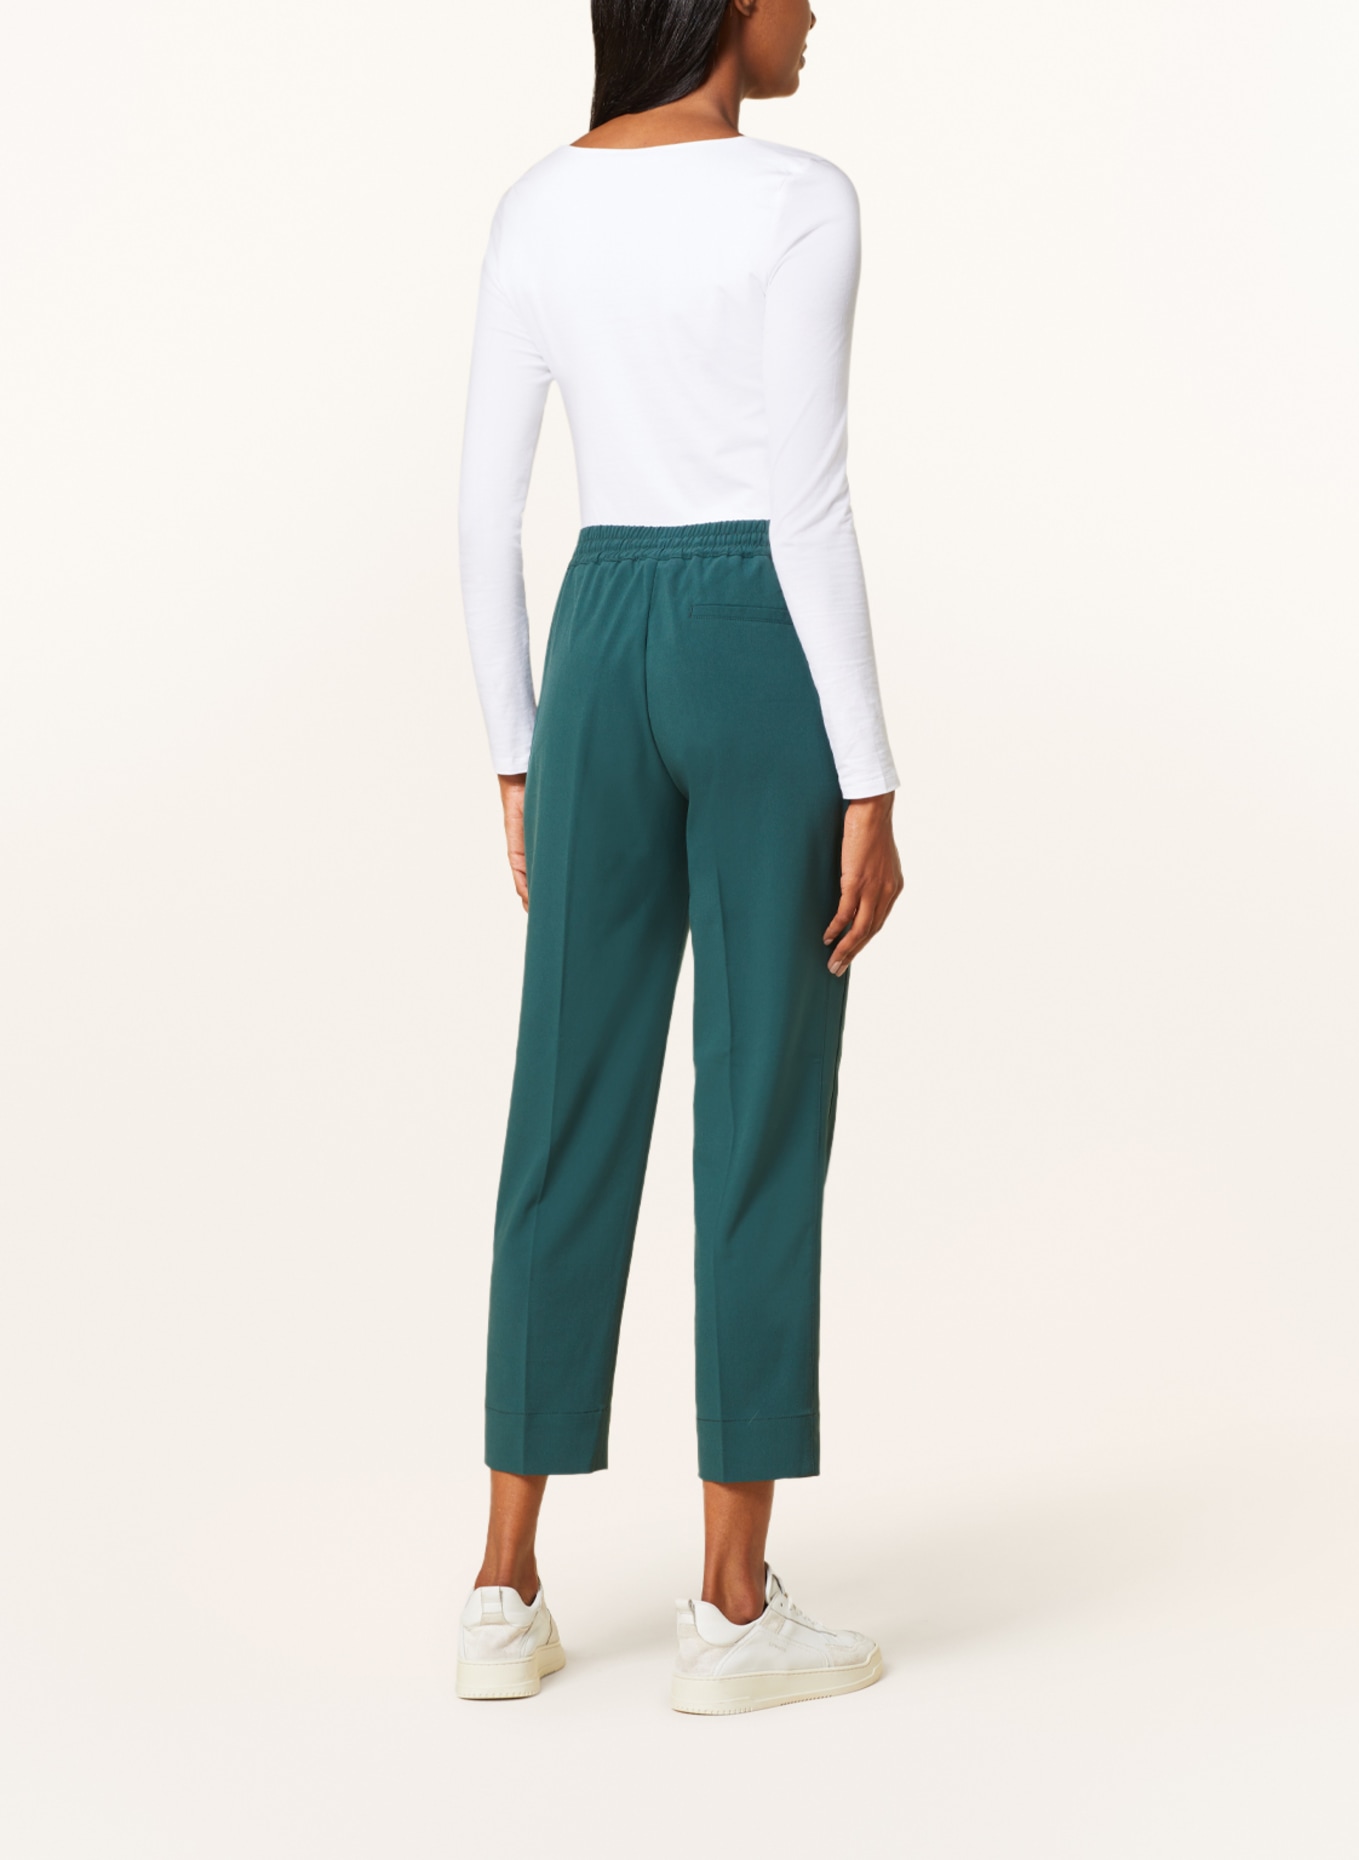 OPUS 7/8 trousers MELOSA in jogger style , Color: TEAL (Image 3)